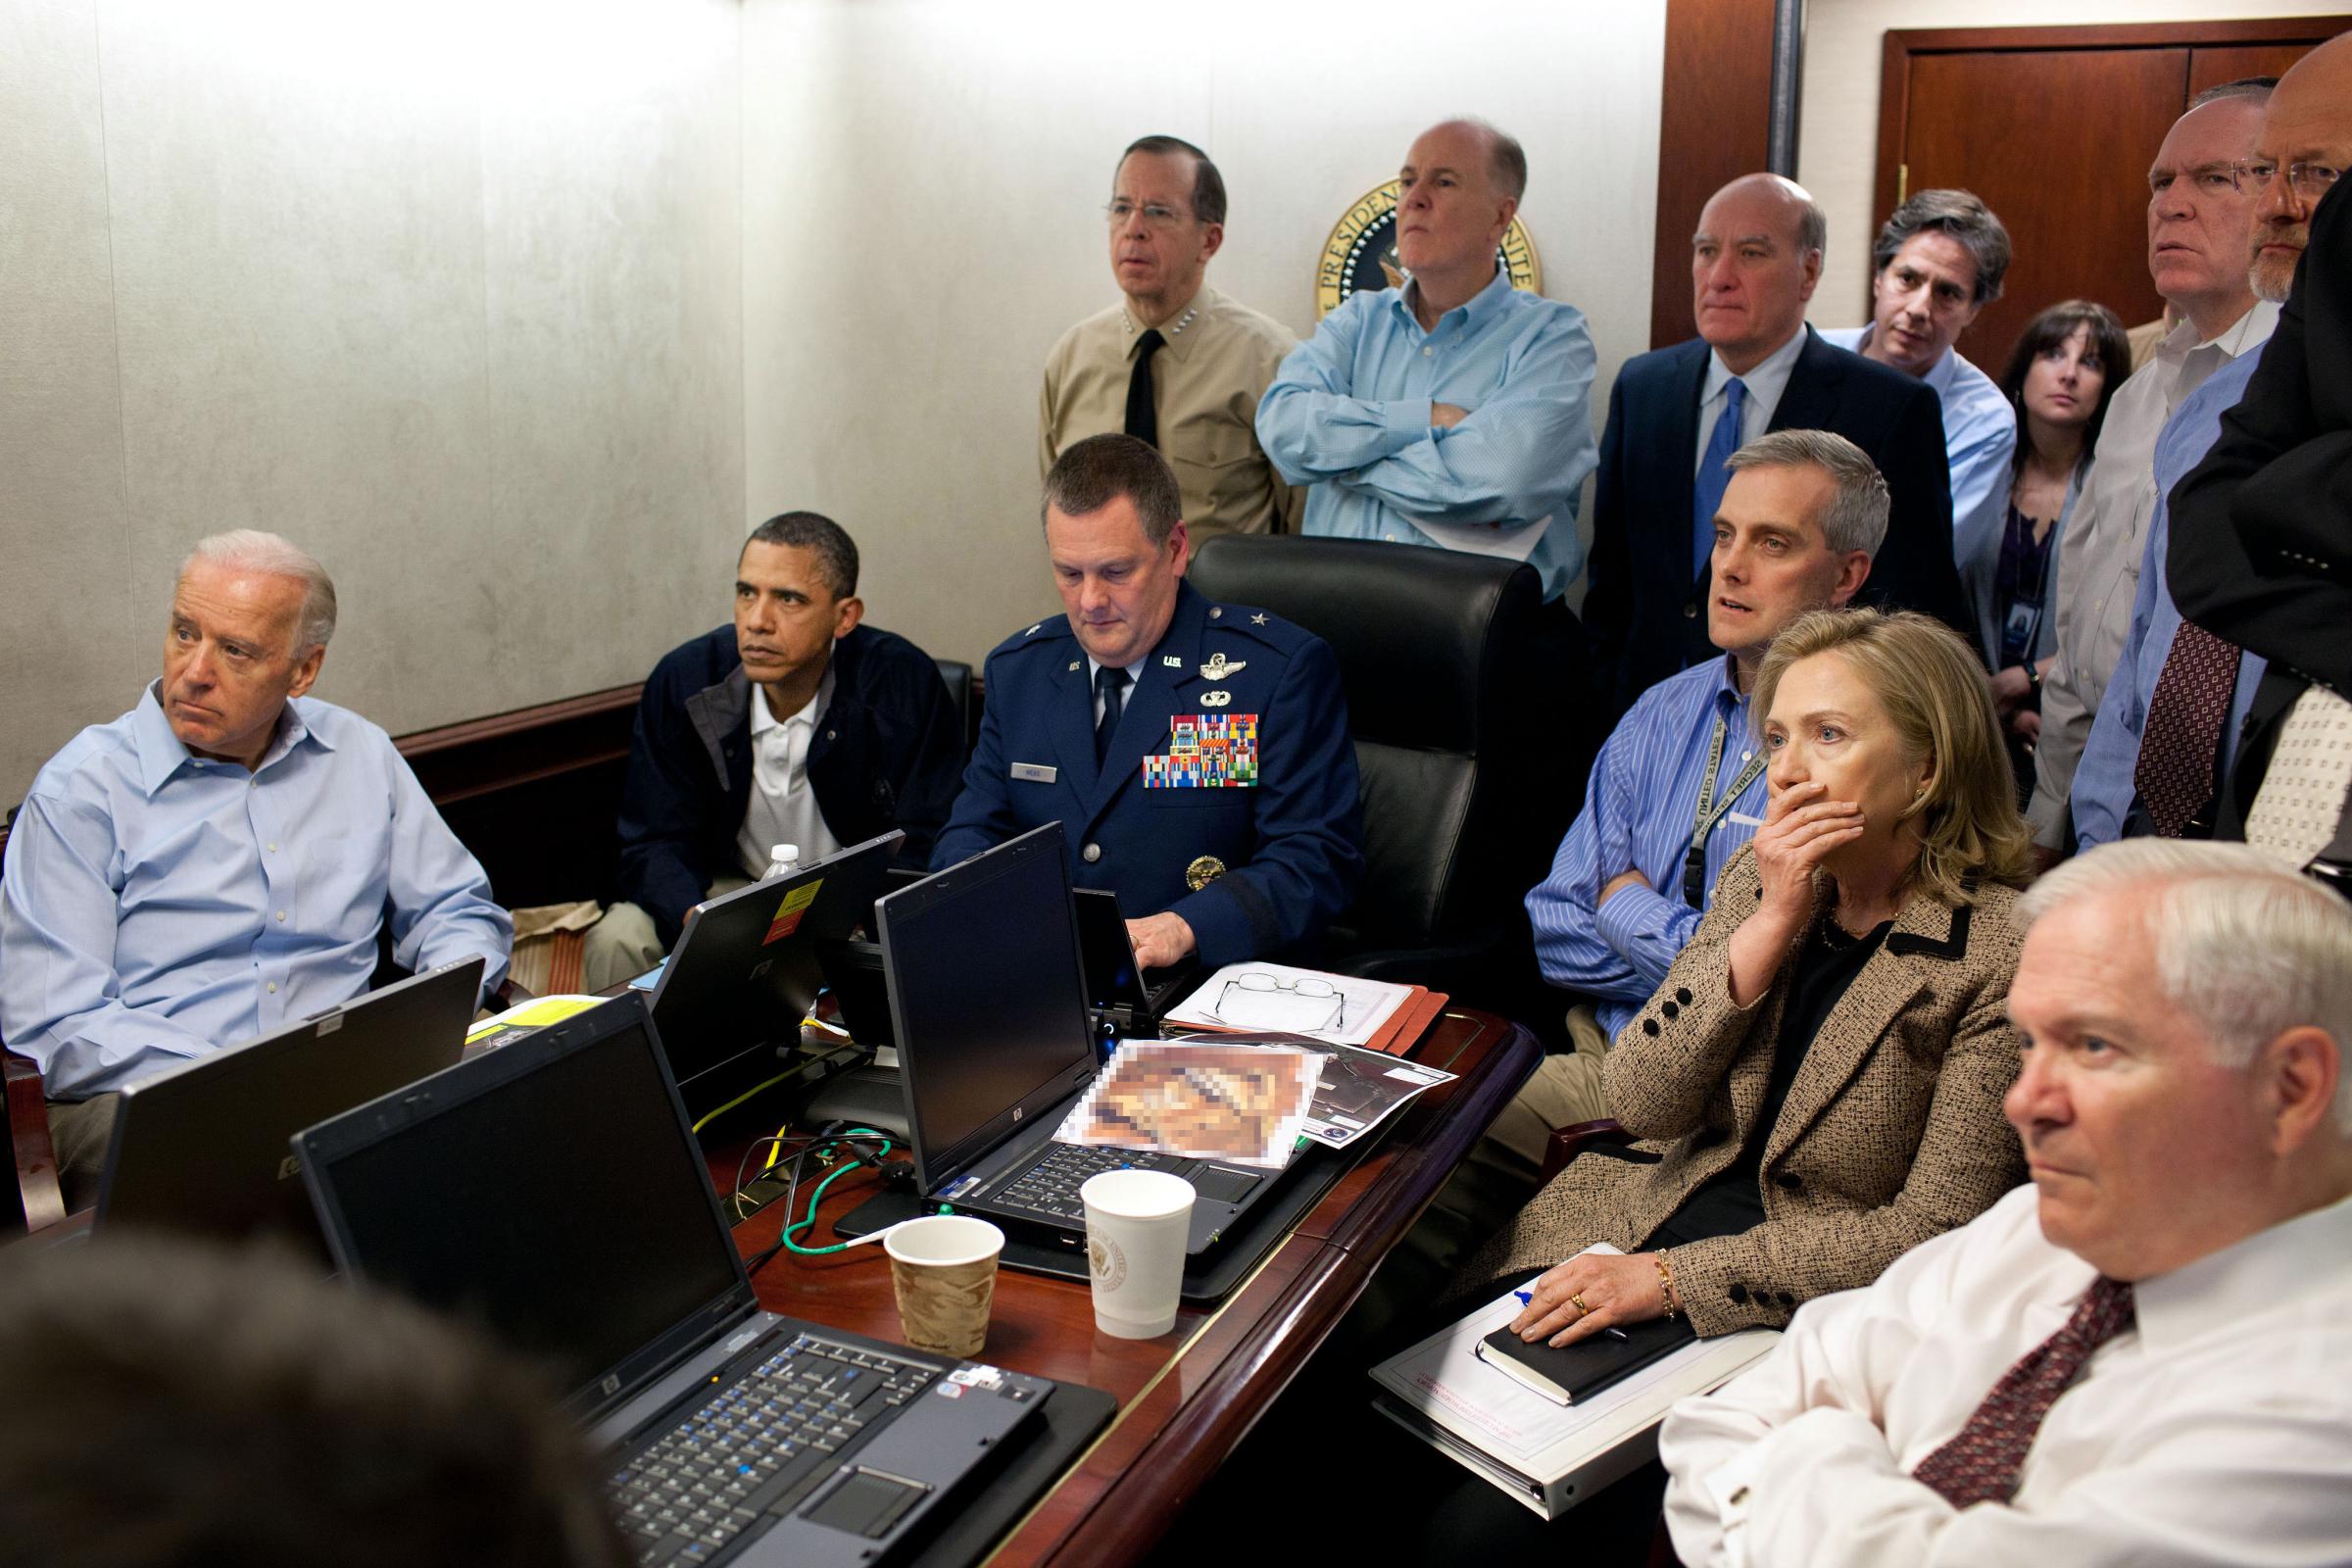 President Barack Obama, Vice President Joe Biden and former Secretary of State Hillary Clinton, along with with members of the national security team, receive an update on the mission against Osama bin Laden in the Situation Room of the White House in Washington, D.C., on May 1, 2011.